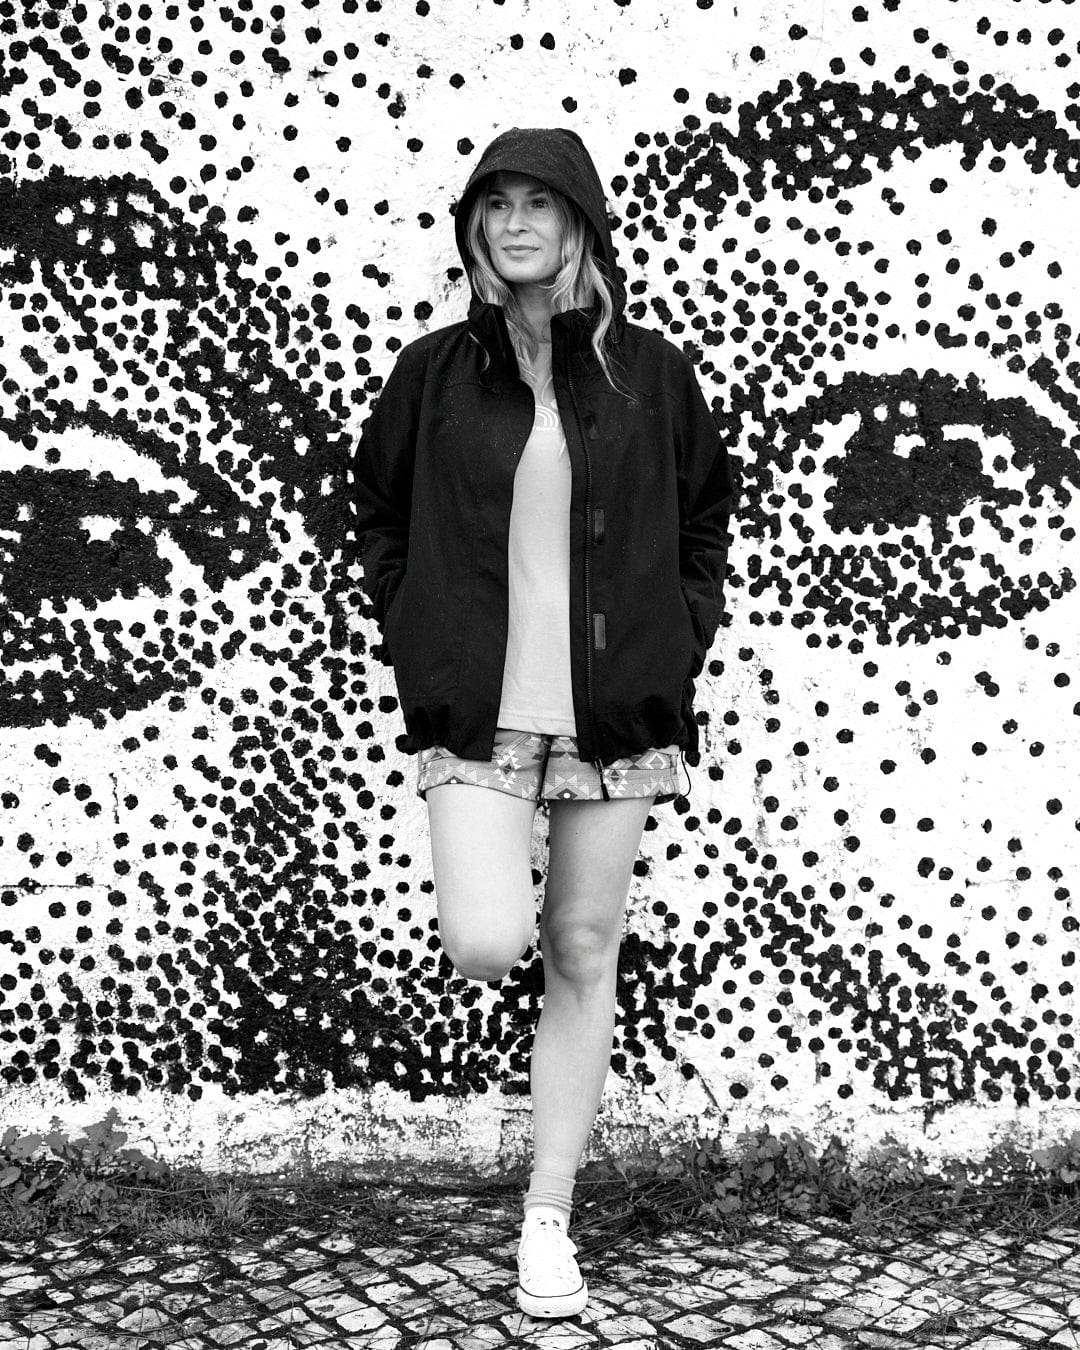 A black and white photo of a woman posing in front of a polka dot wall, showcasing Saltrock's Reflective Solar - Womens Softshell Jacket in Black branding.